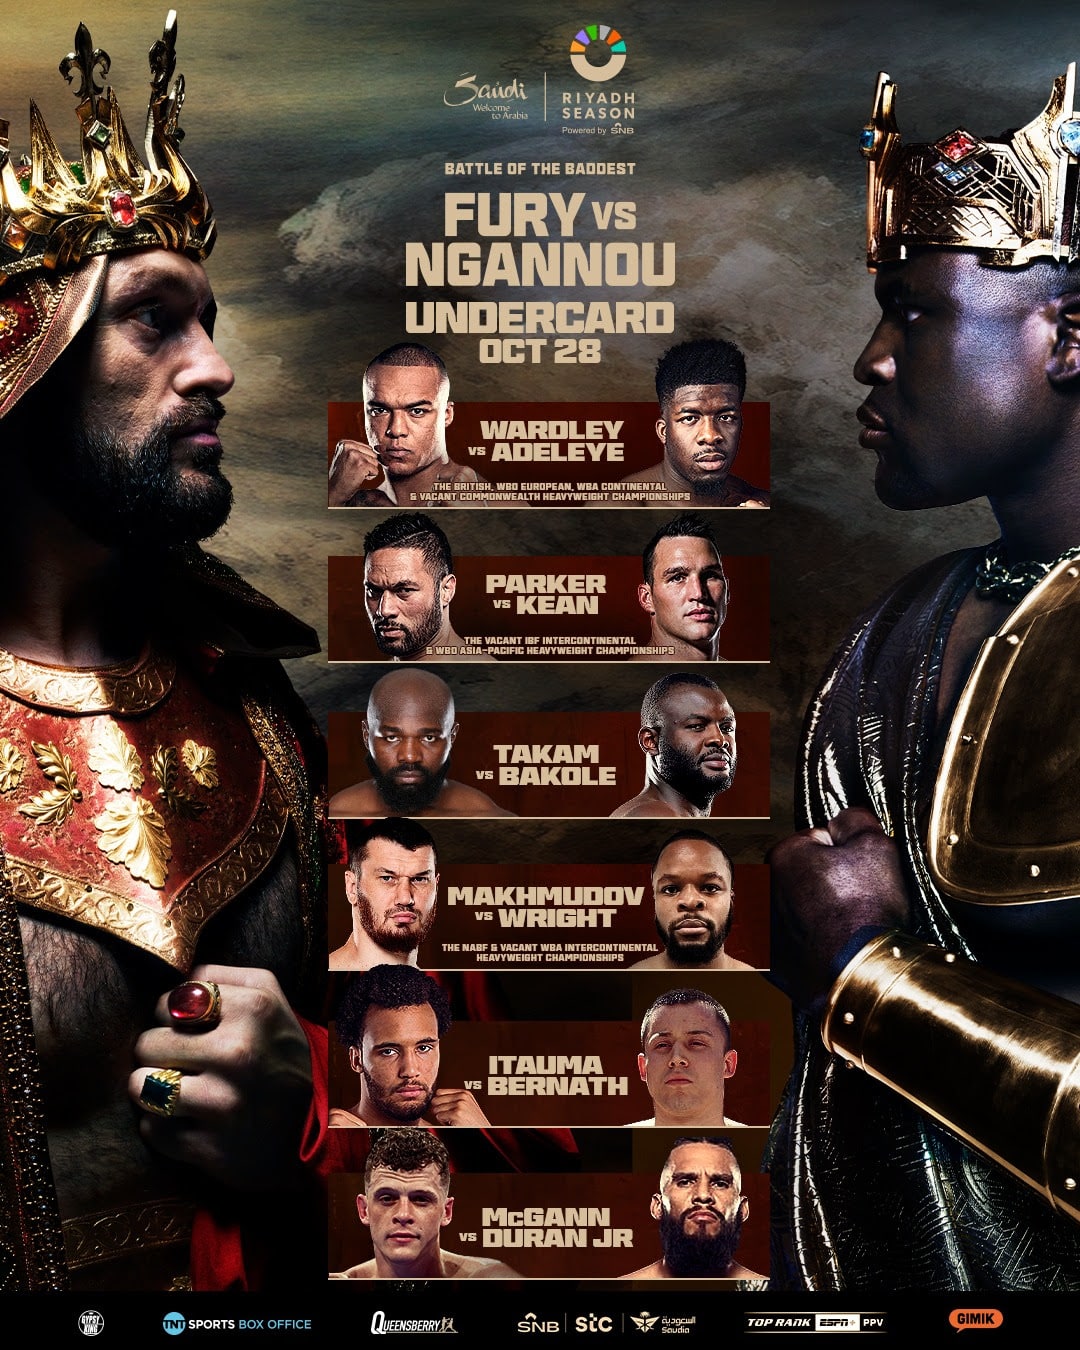 Overviewing the Fury v Ngannou Undercard